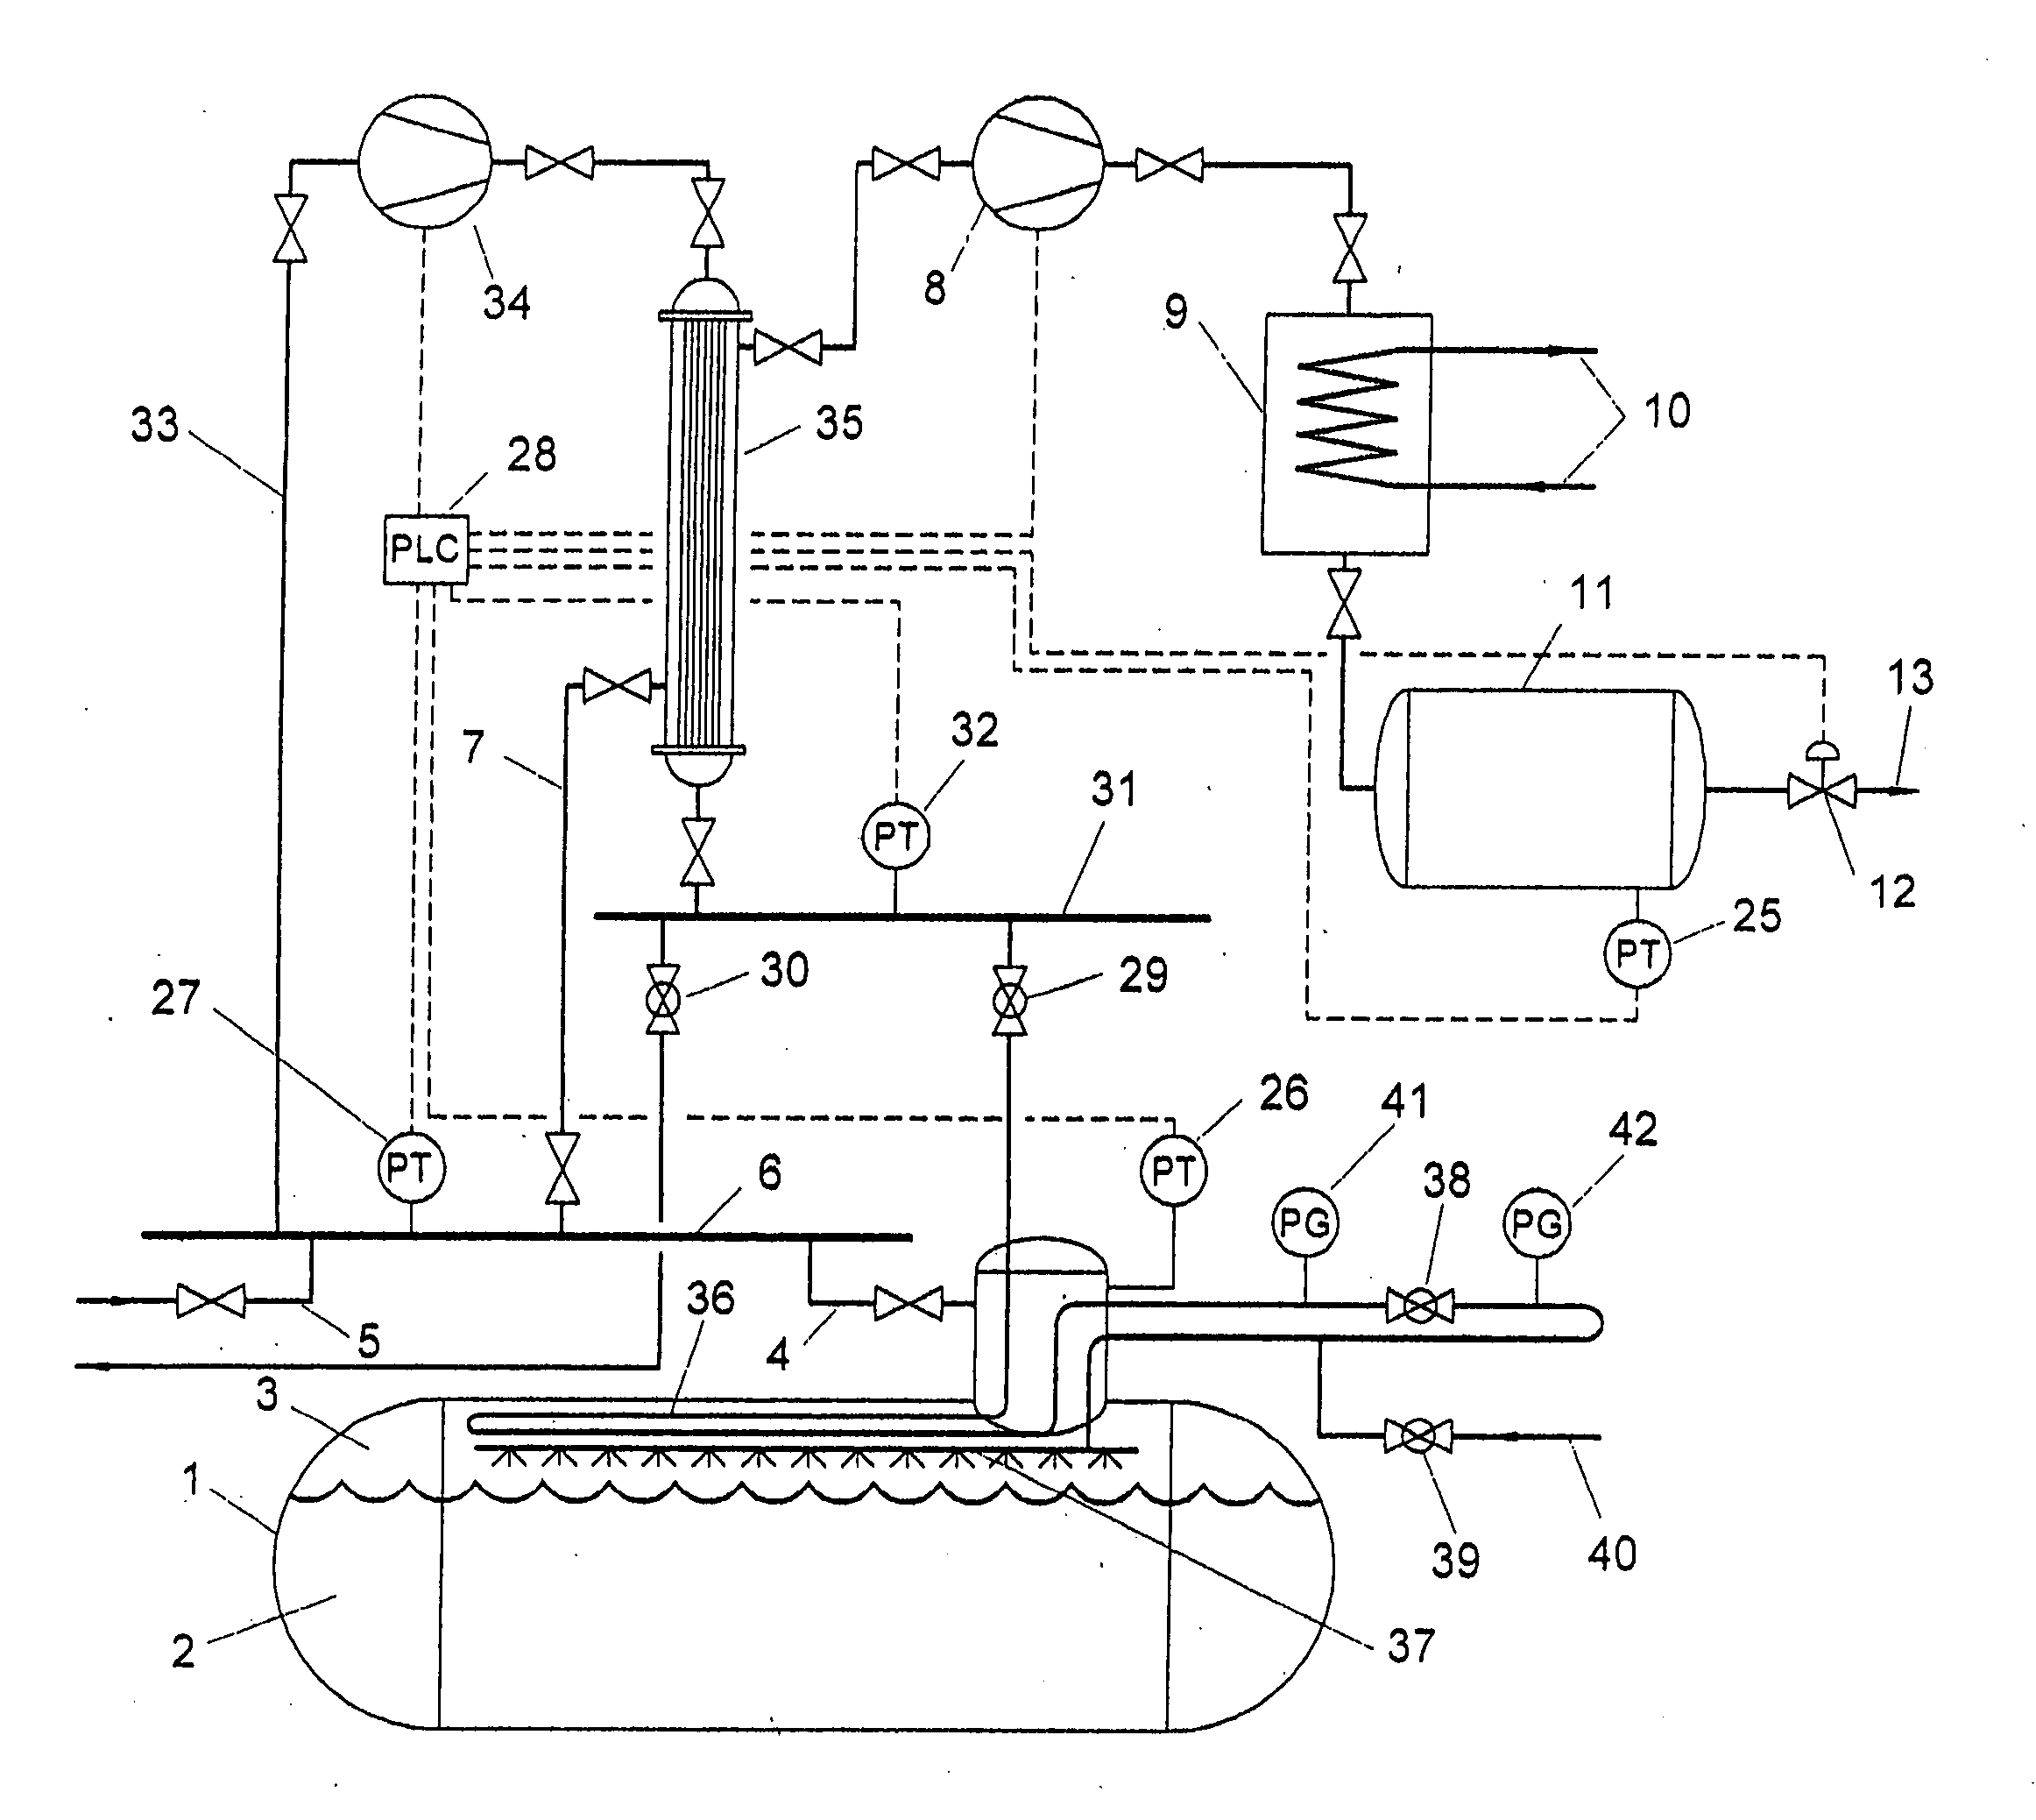 System and process for transporting LNG by non-self-propelled marine LNG carrier